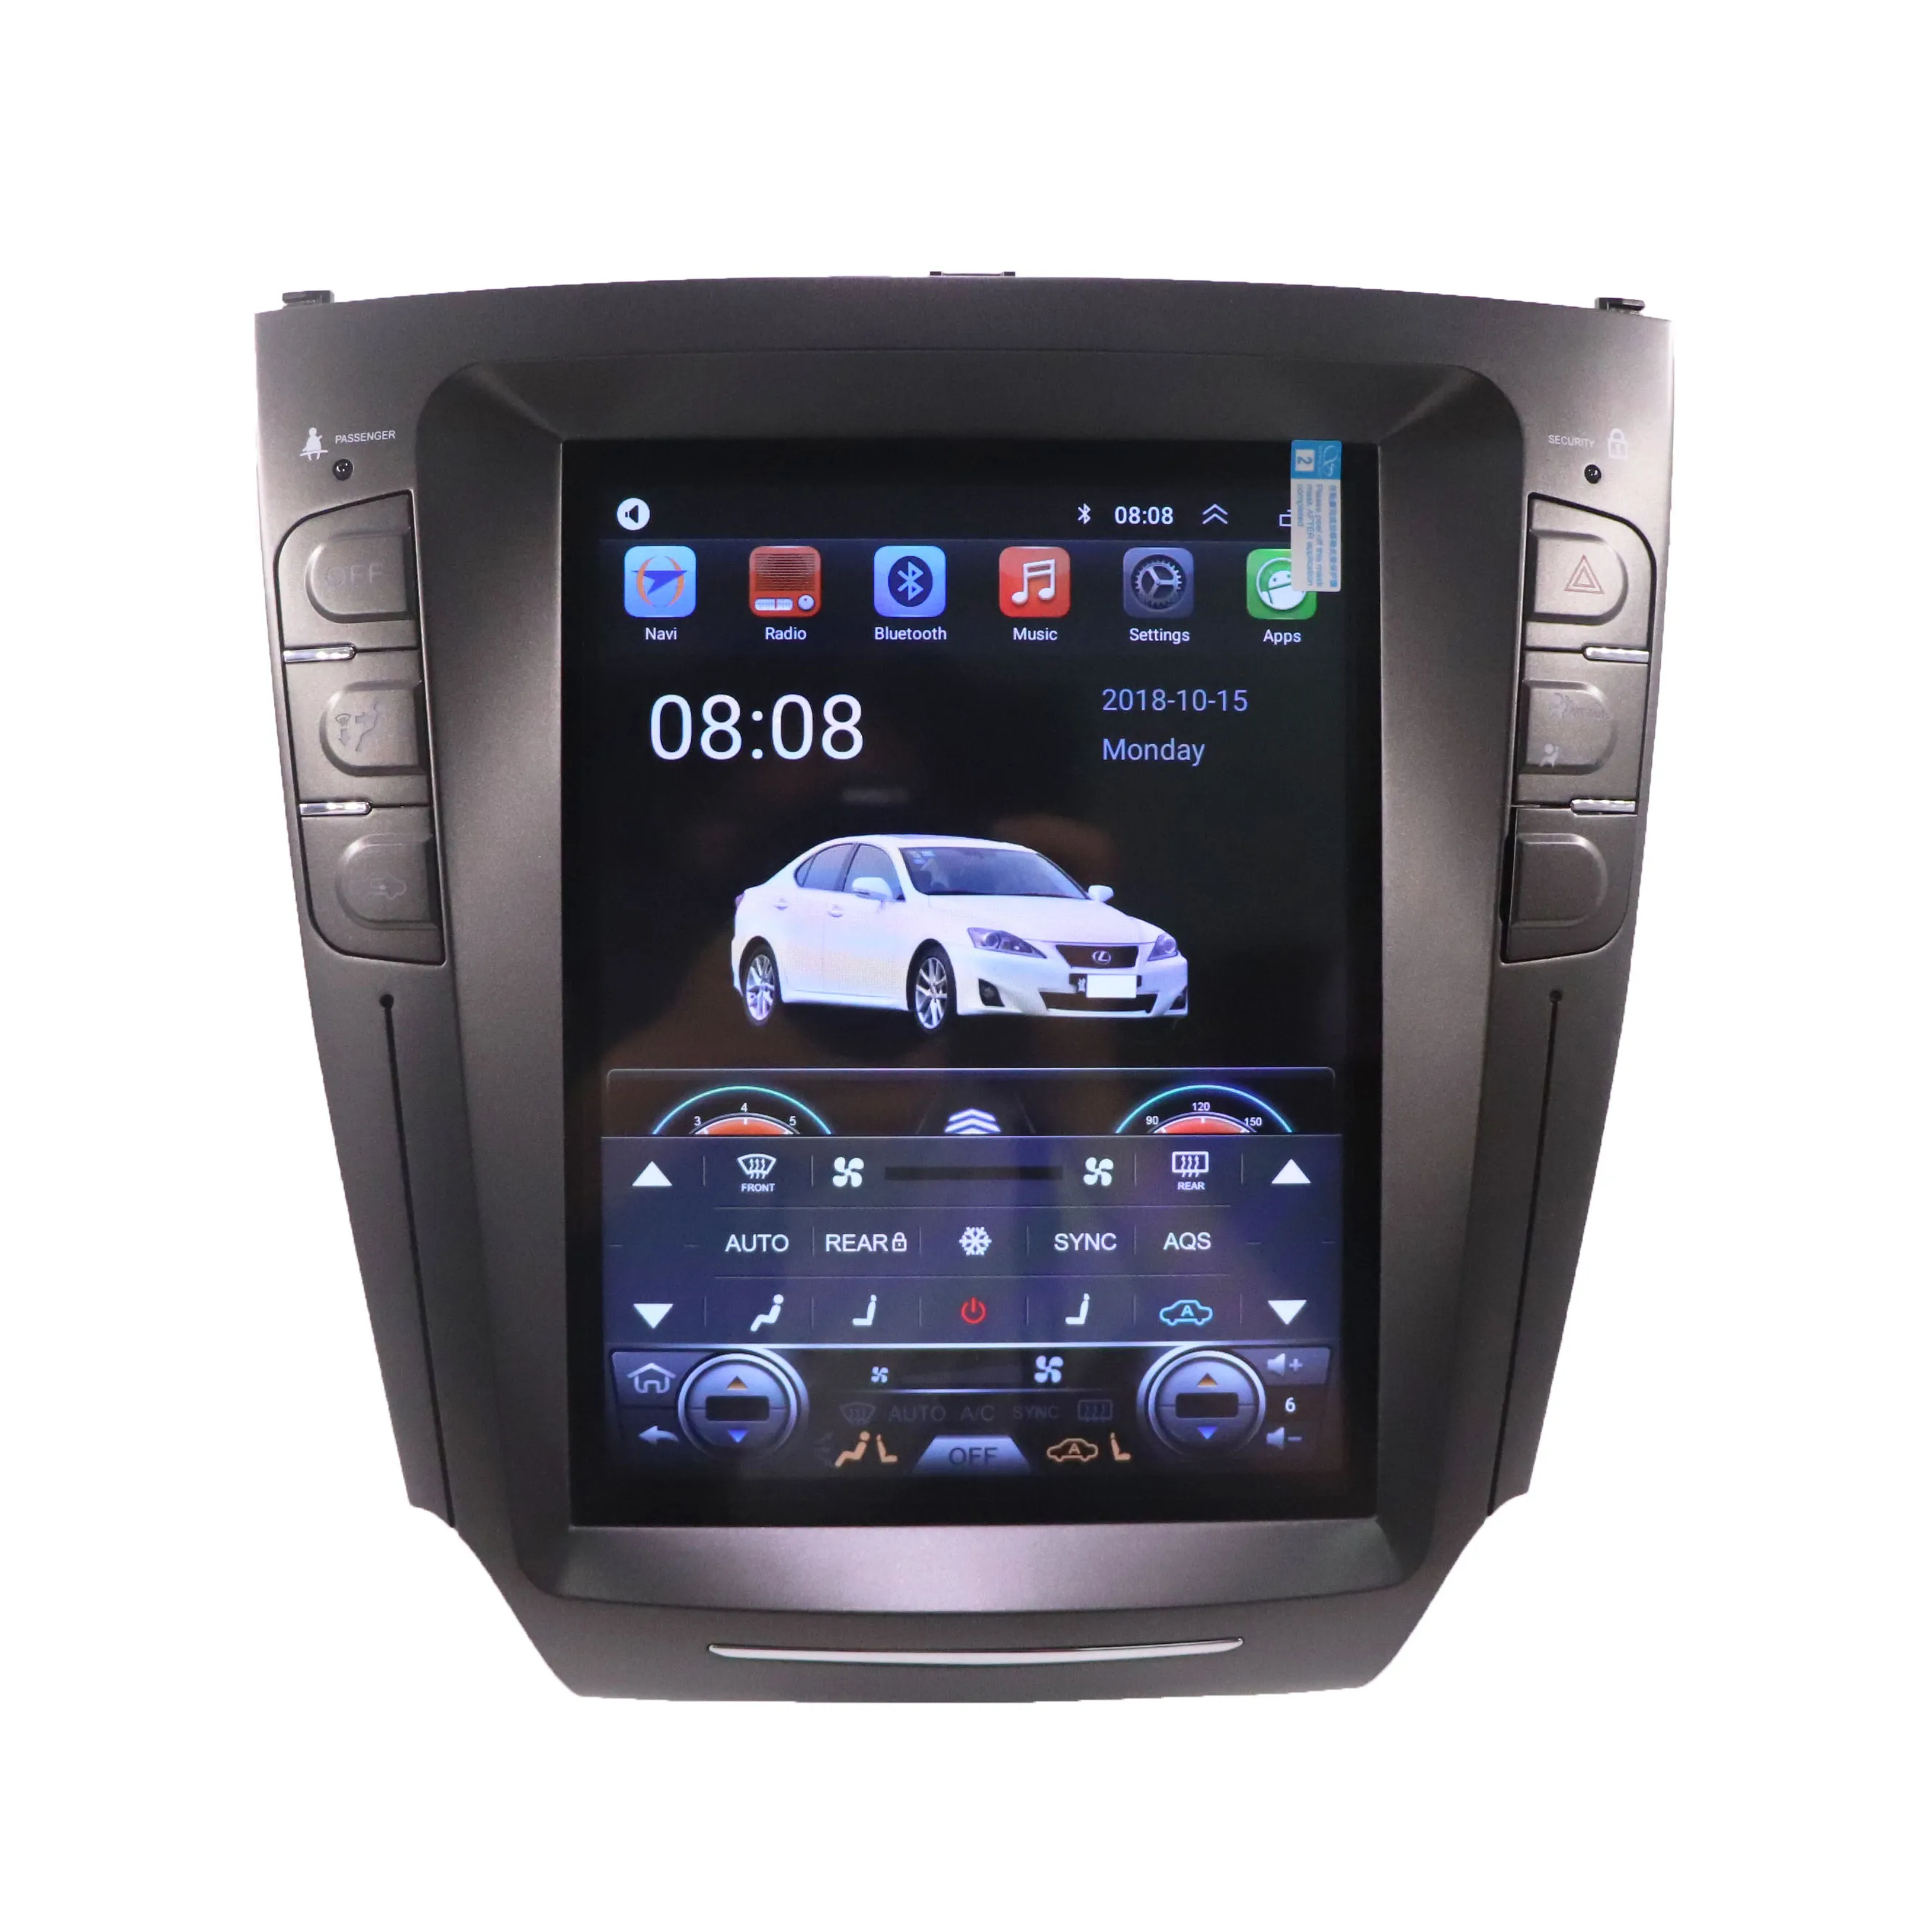 Fabrik preis Android 11 Auto DVD-Player GPS-Navigations radio für Lexus IS IS250 IS200 IS300 IS350 Multimedia mit BT Plays tore